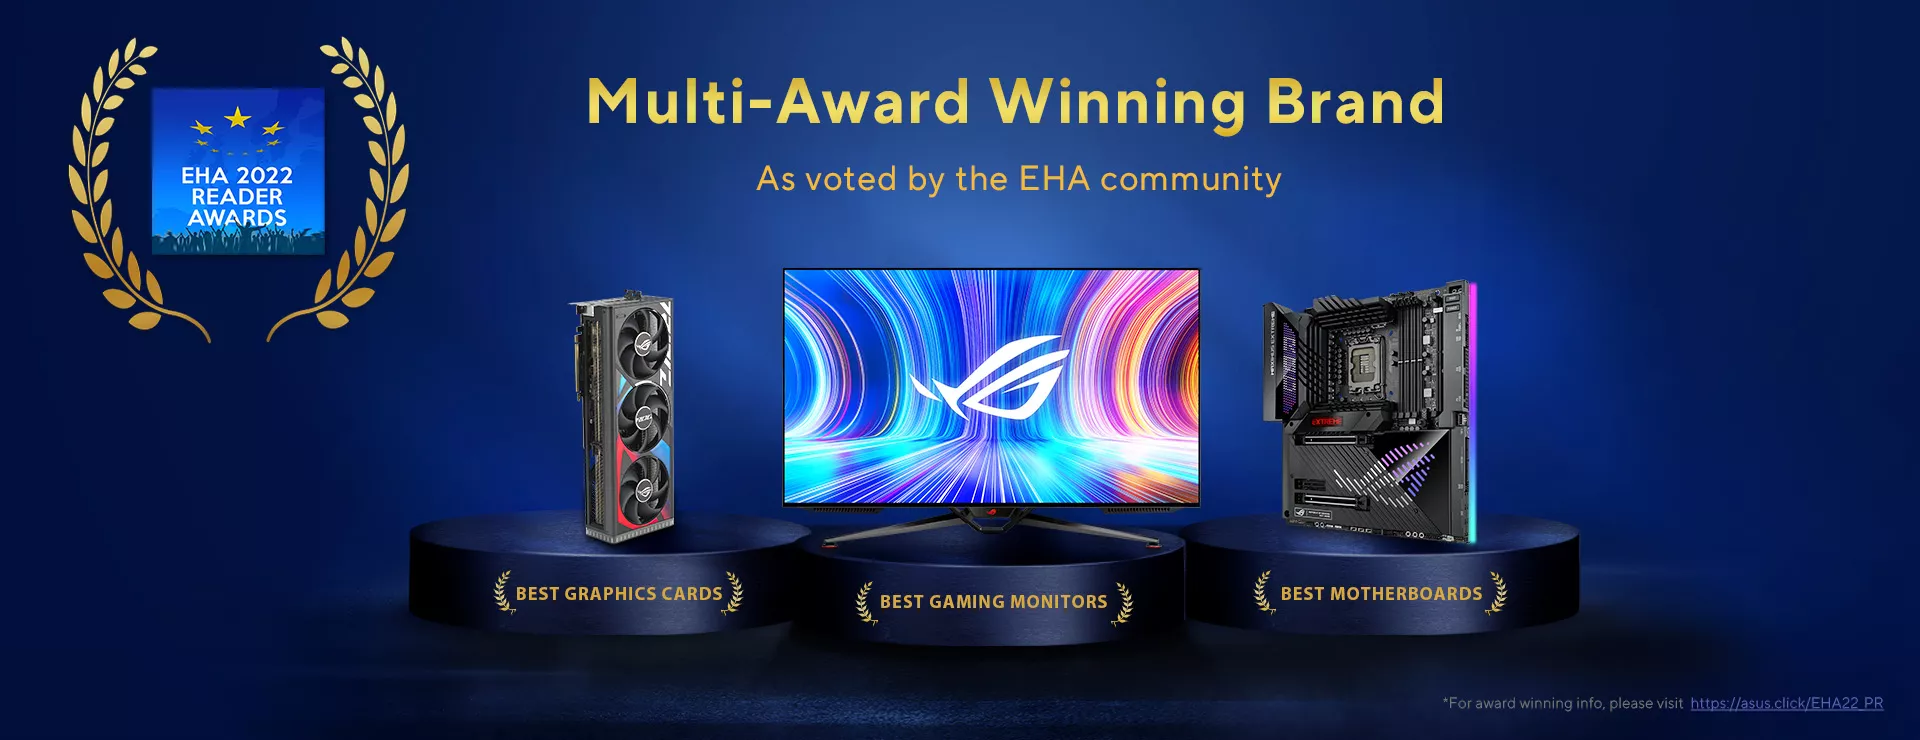 ROG products win in EHA Reader awards 2022